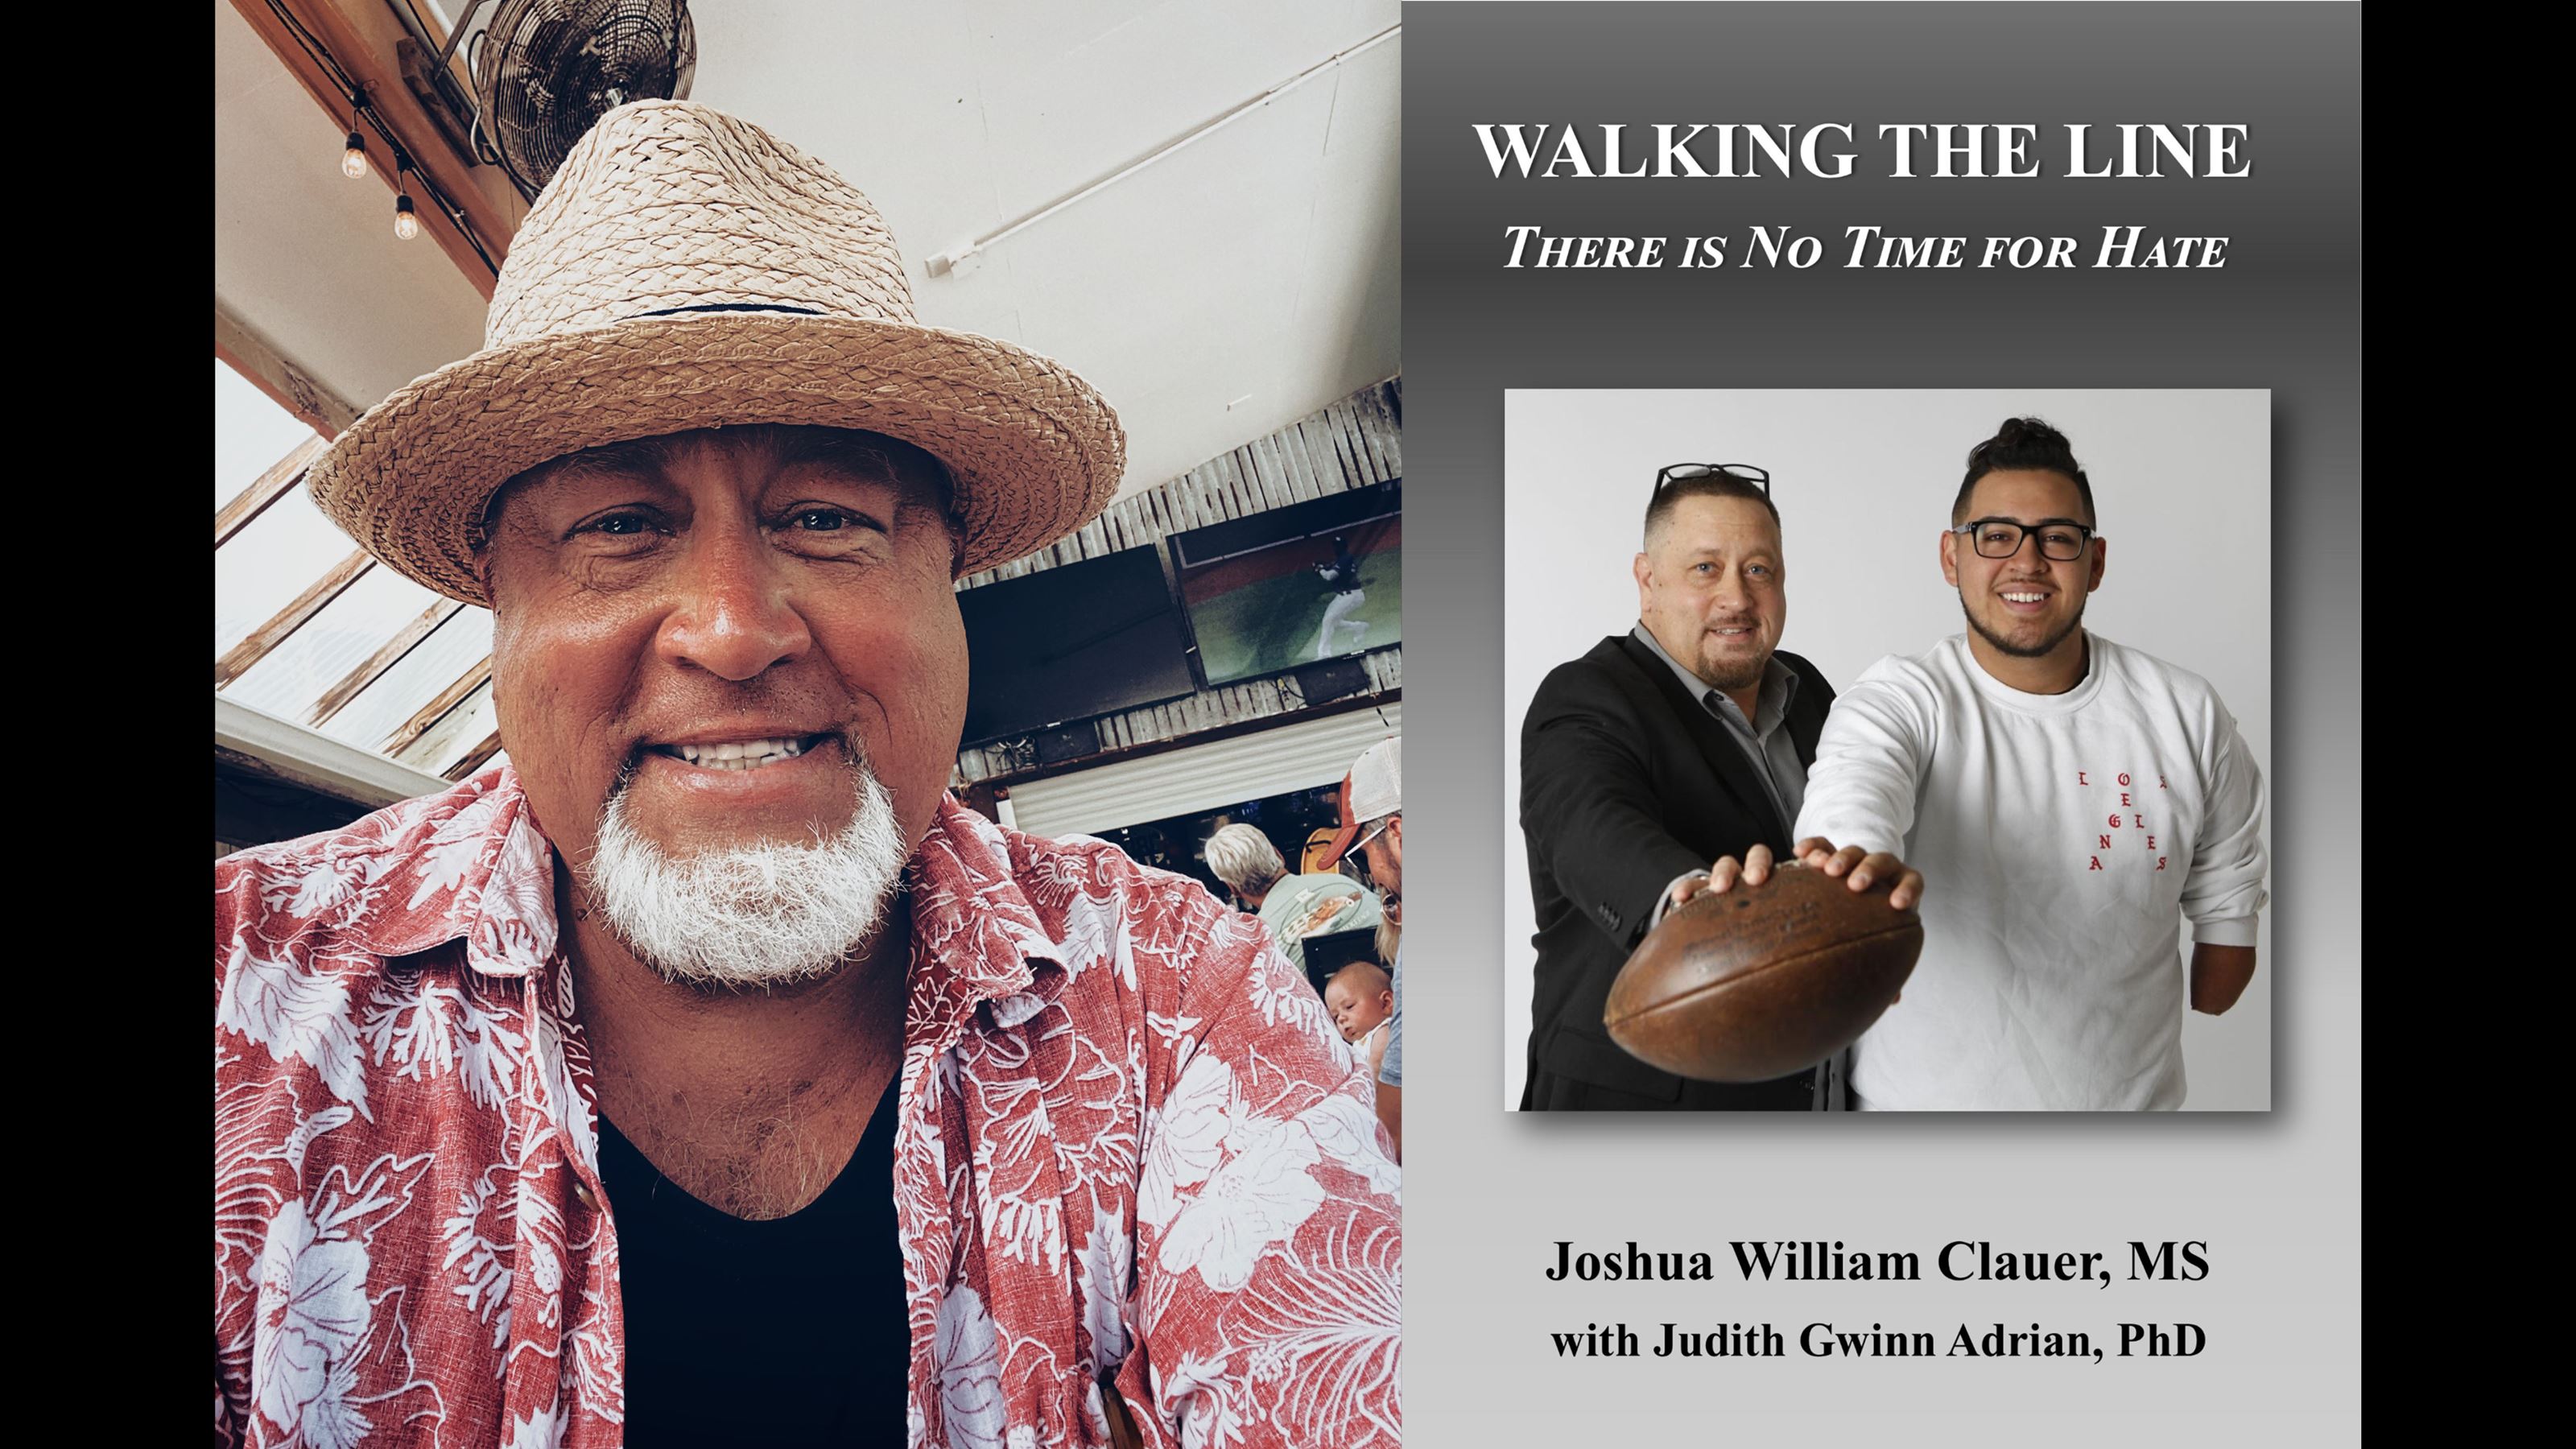 On the left is a recent photo of Joshua William Clauer on vacation wearing a hat and island-style shirt and on the right is the cover of his book with Judith Gwinn Adrian, Walking the Line: There is No Time For Hate.